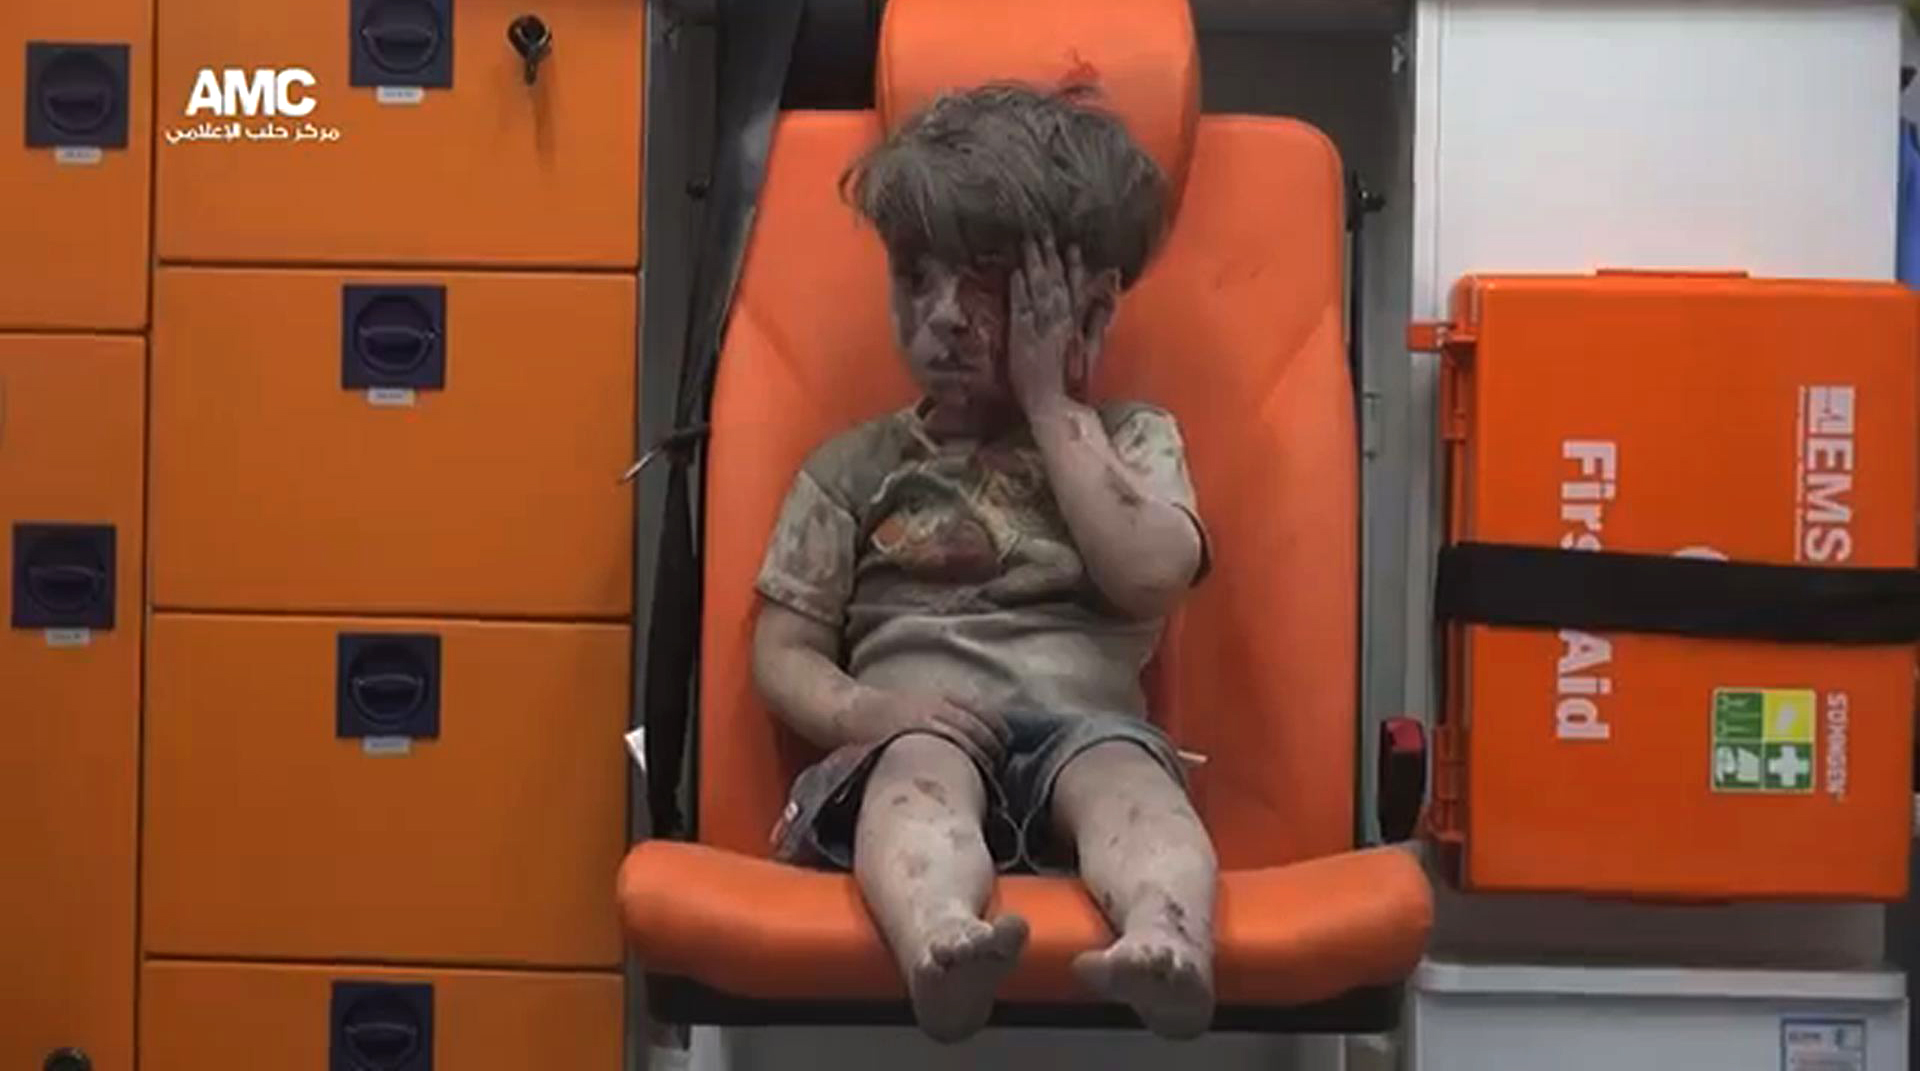 An image grab taken from a video uploaded by the Syrian opposition's activist group Aleppo Media Centre (AMC) on August 17, 2016 is said to show a young Syrian boy covered in dust and blood touching a wound on his head as he sits in shock in an ambulance after being rescued from the rubble of a building hit by an air strike in the rebel-held Qaterji neighbourhood of the northern Syrian city of Aleppo. / AFP PHOTO / AMC / HO / === RESTRICTED TO EDITORIAL USE - MANDATORY CREDIT "AFP PHOTO / HO / AMC " - NO MARKETING NO ADVERTISING CAMPAIGNS - DISTRIBUTED AS A SERVICE TO CLIENTS FROM ALTERNATIVE SOURCES, AFP IS NOT RESPONSIBLE FOR ANY DIGITAL ALTERATIONS TO THE PICTURE'S EDITORIAL CONTENT, DATE AND LOCATION WHICH CANNOT BE INDEPENDENTLY VERIFIED ===   /